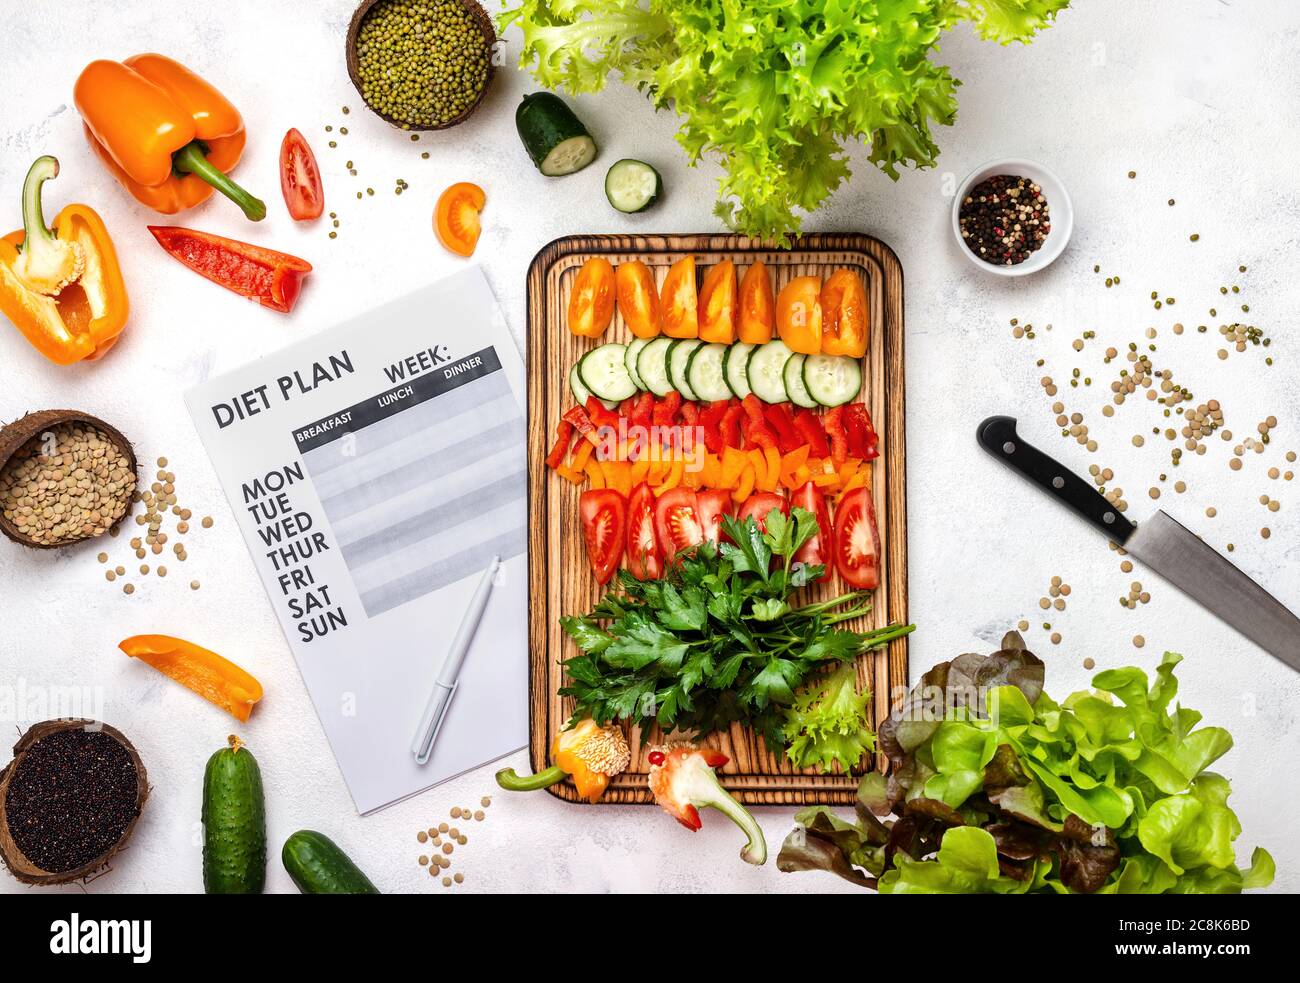 Diet plan and chopped fresh vegetables on wooden board. Stock Photo